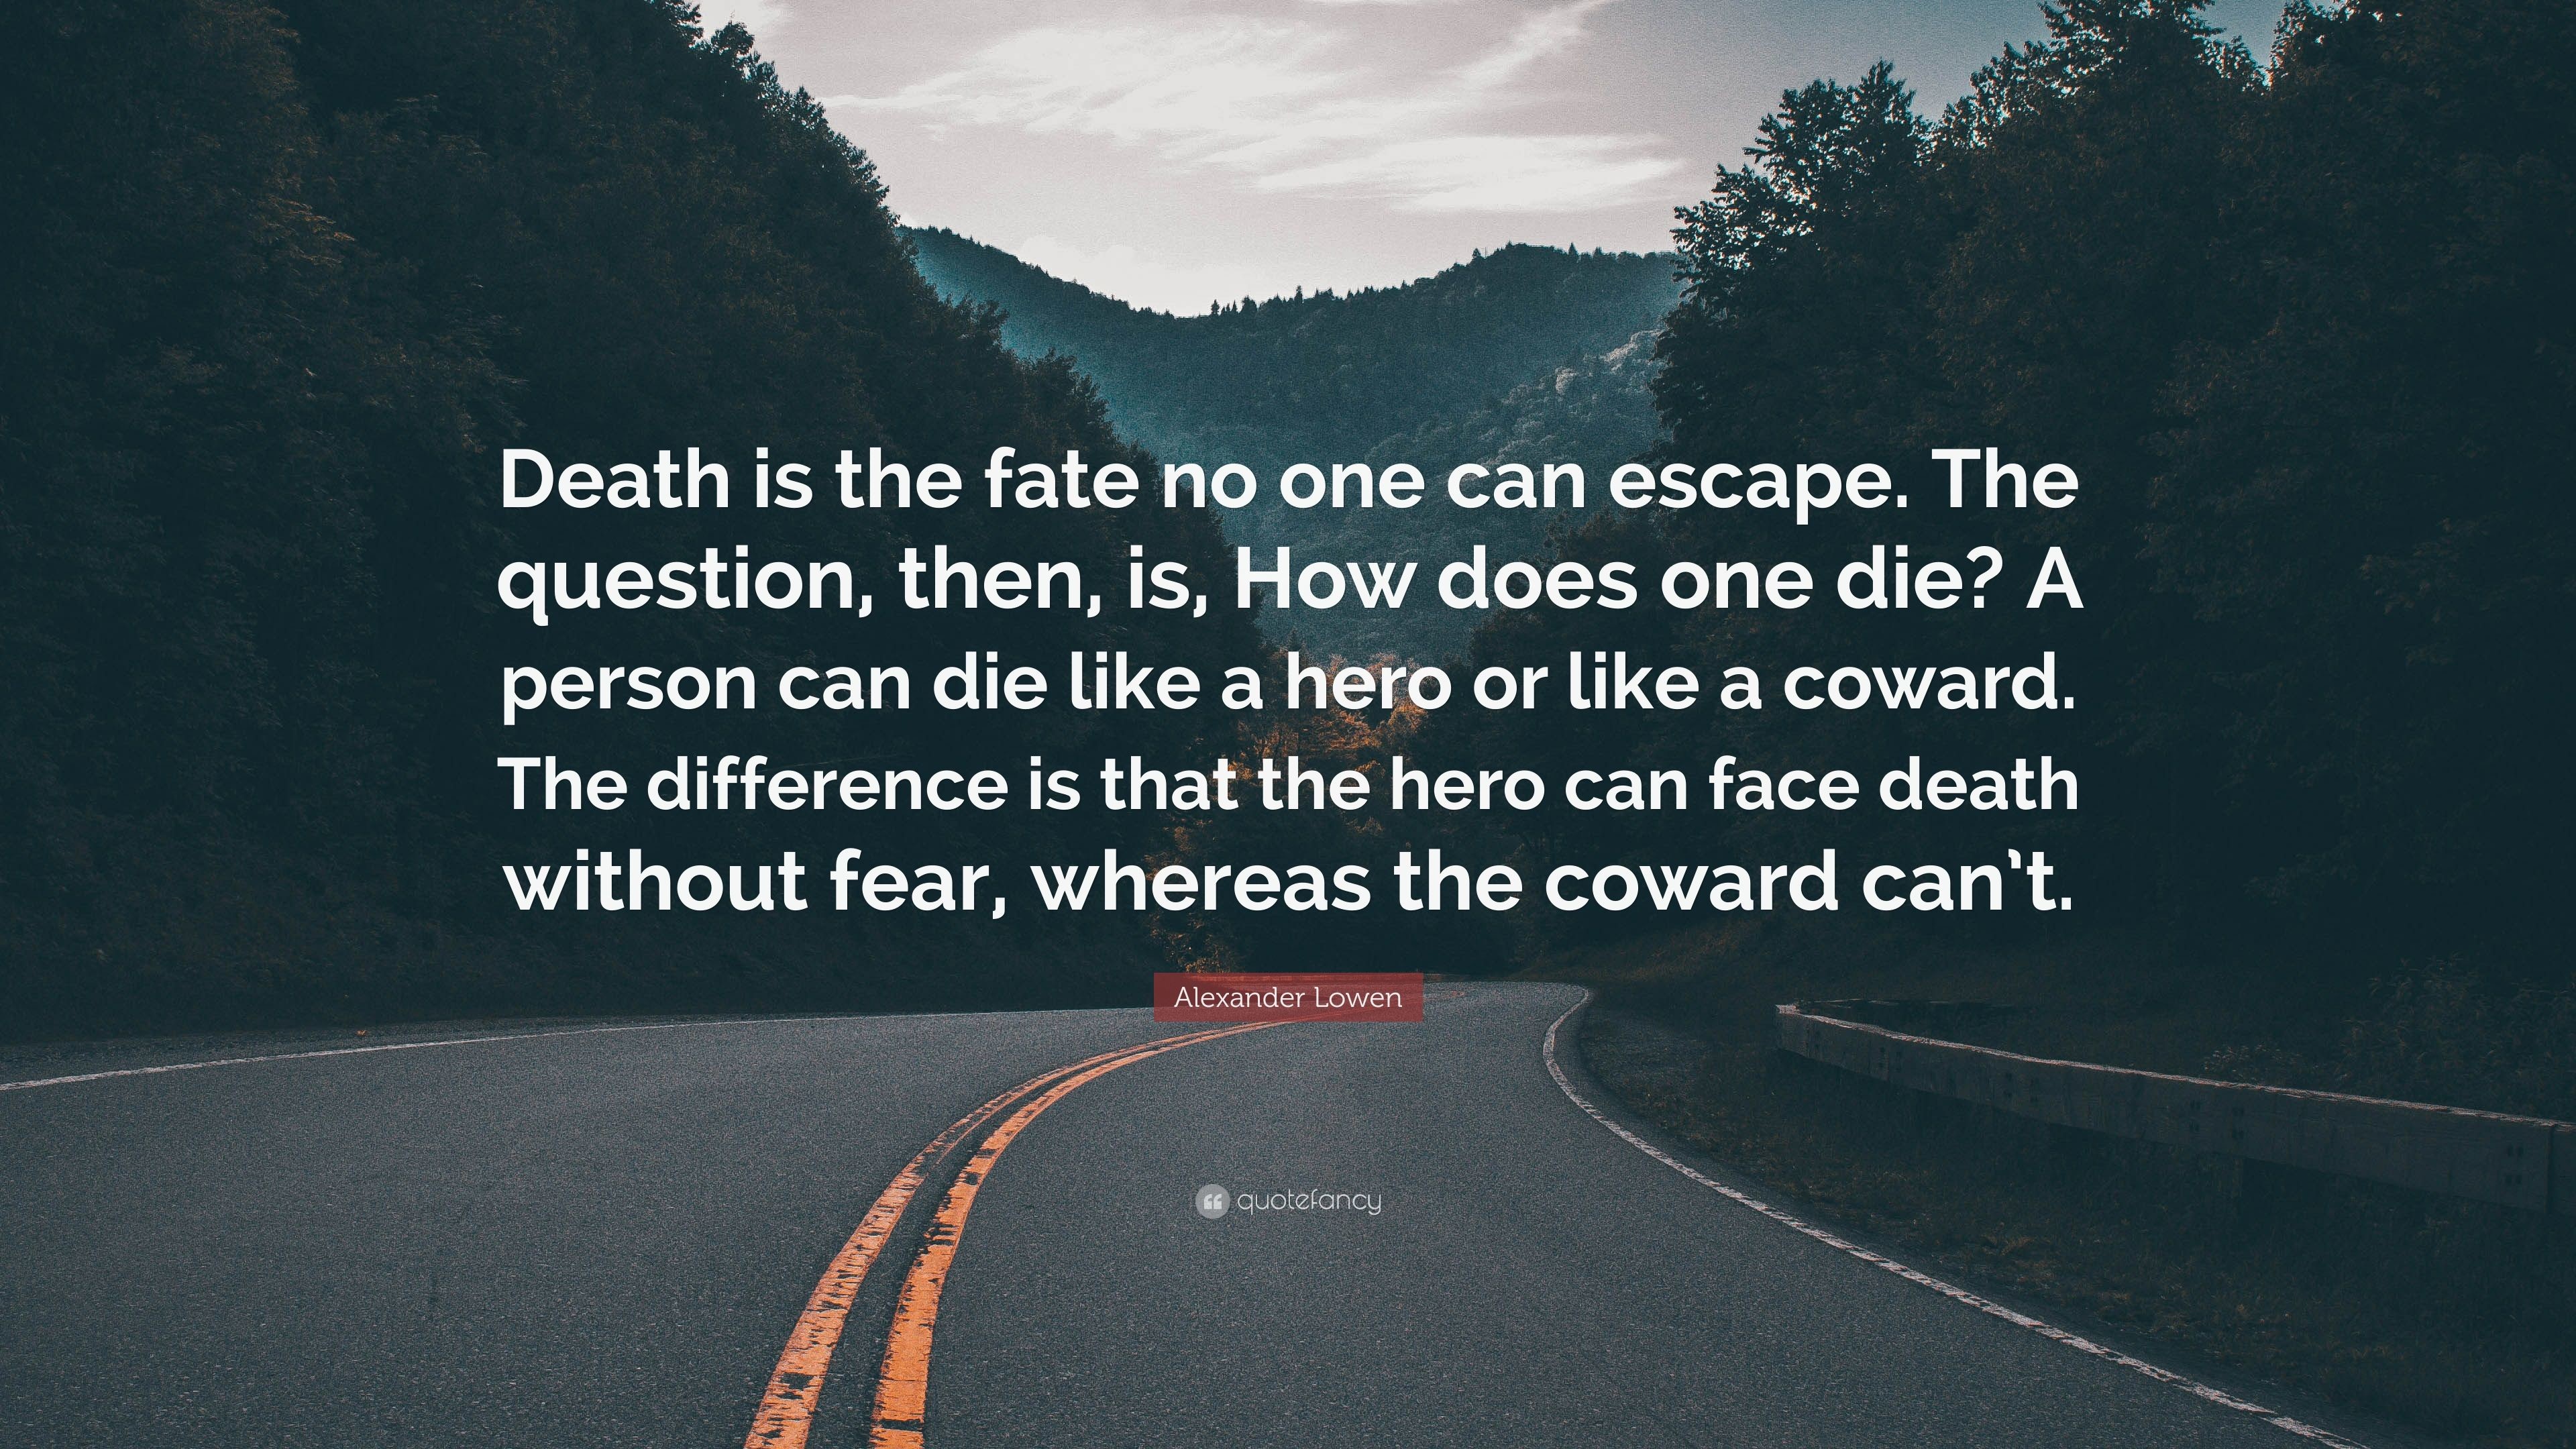 3840x2160 Alexander Lowen Quote: “Death is the fate no one can escape. The question